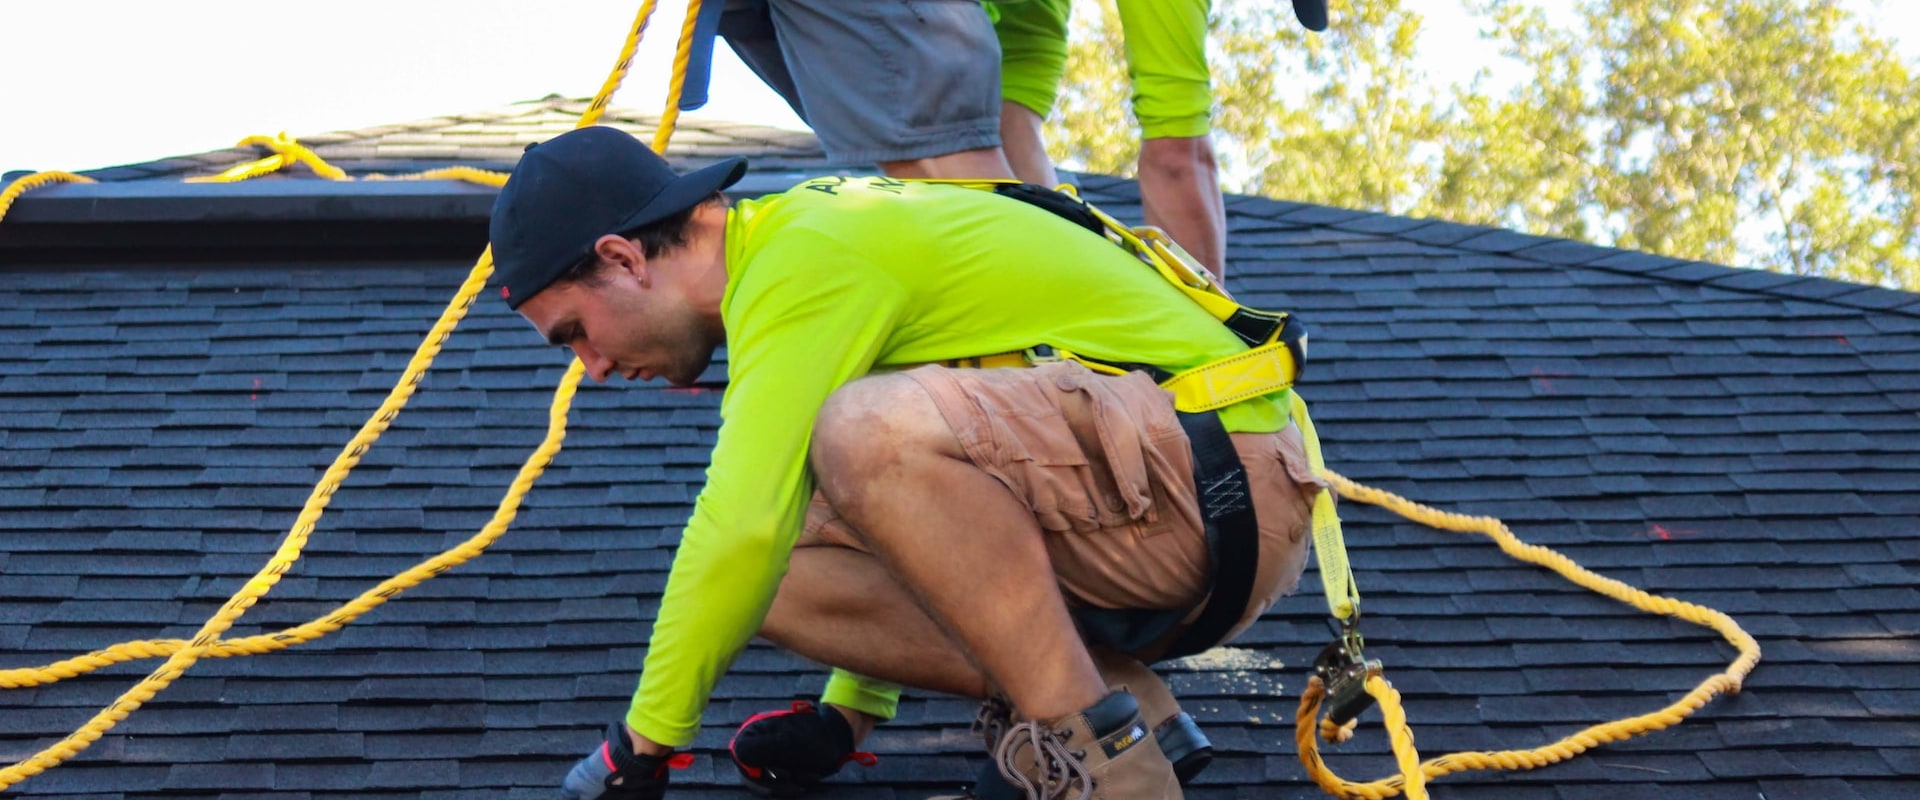 Why Quality Matters: Hiring The Best Roofer For Roof Replacement And Roof Installation In Great Falls, VA